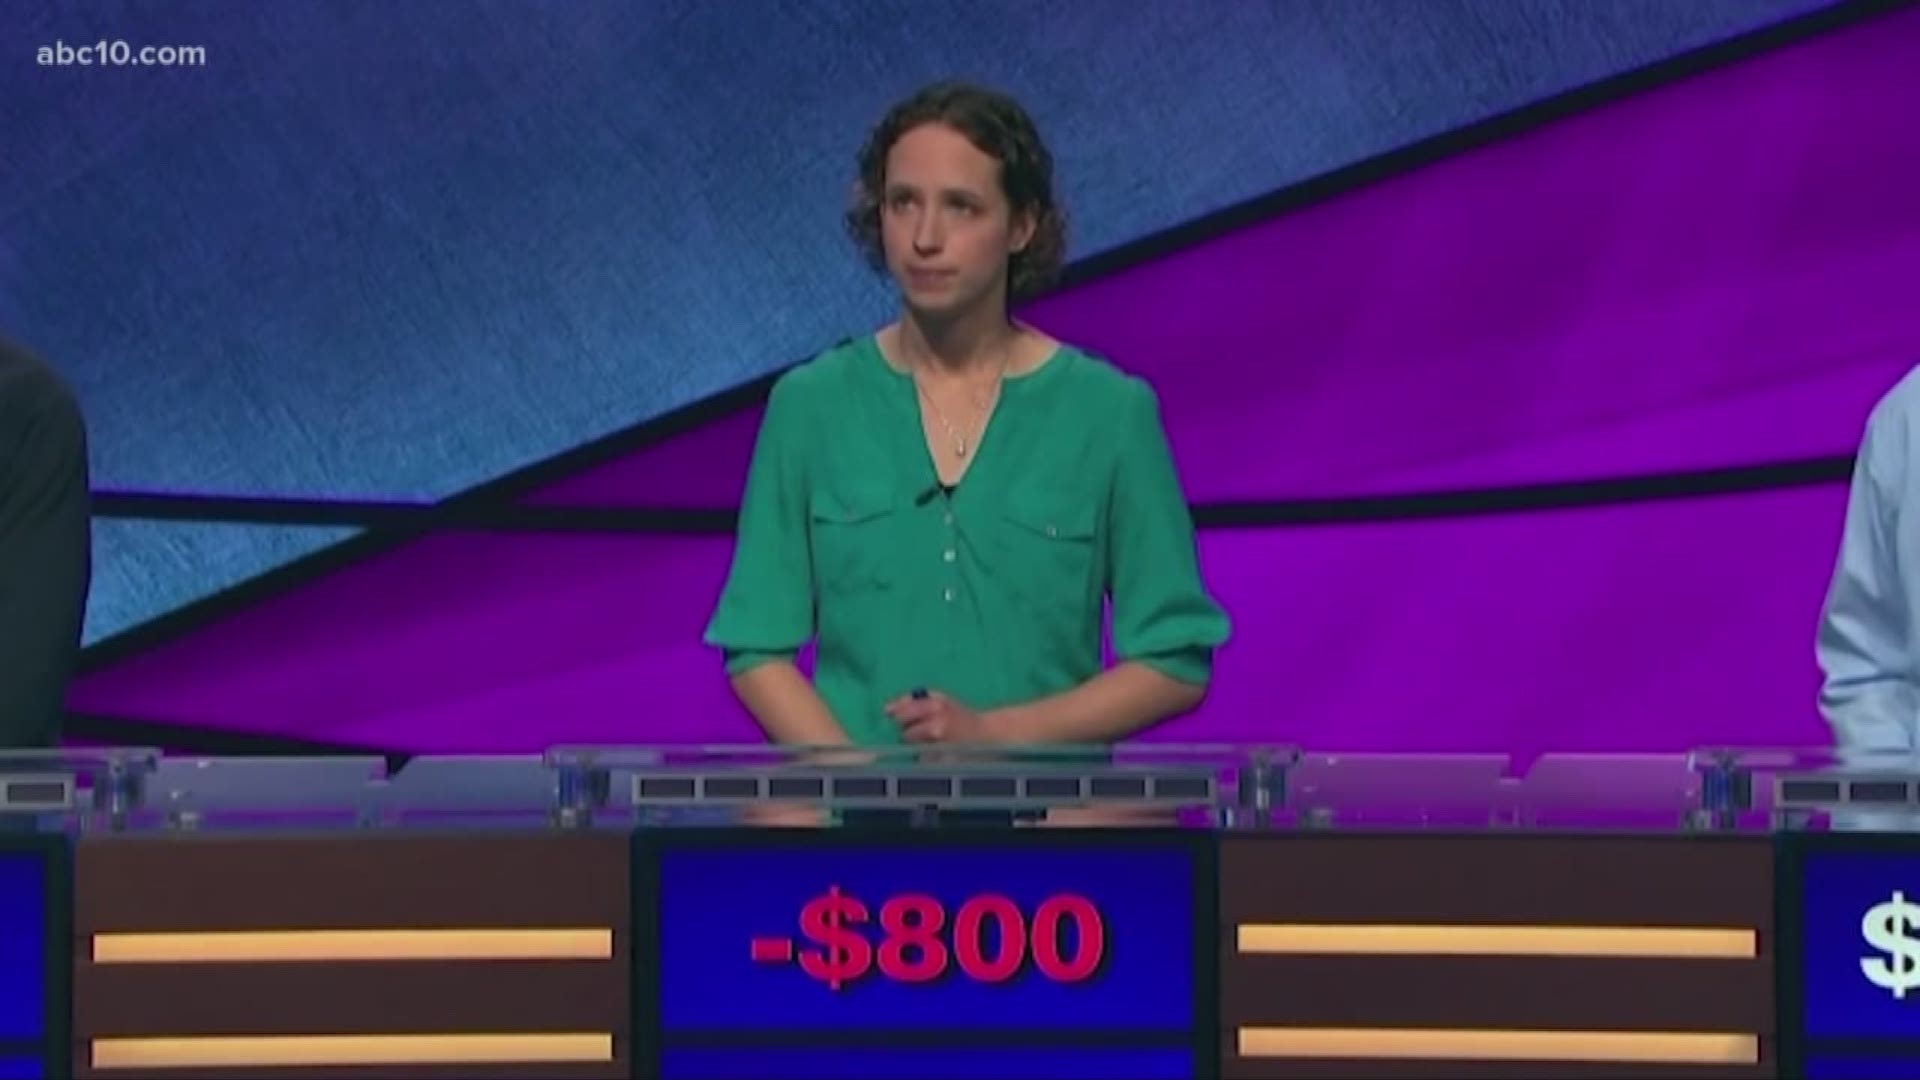 UC Davis Ph.D. student Hannah Safford was on Jeopardy! back in July 2019. Now, before the show's big competition, she dishes to ABC10 what happens behind the scenes.